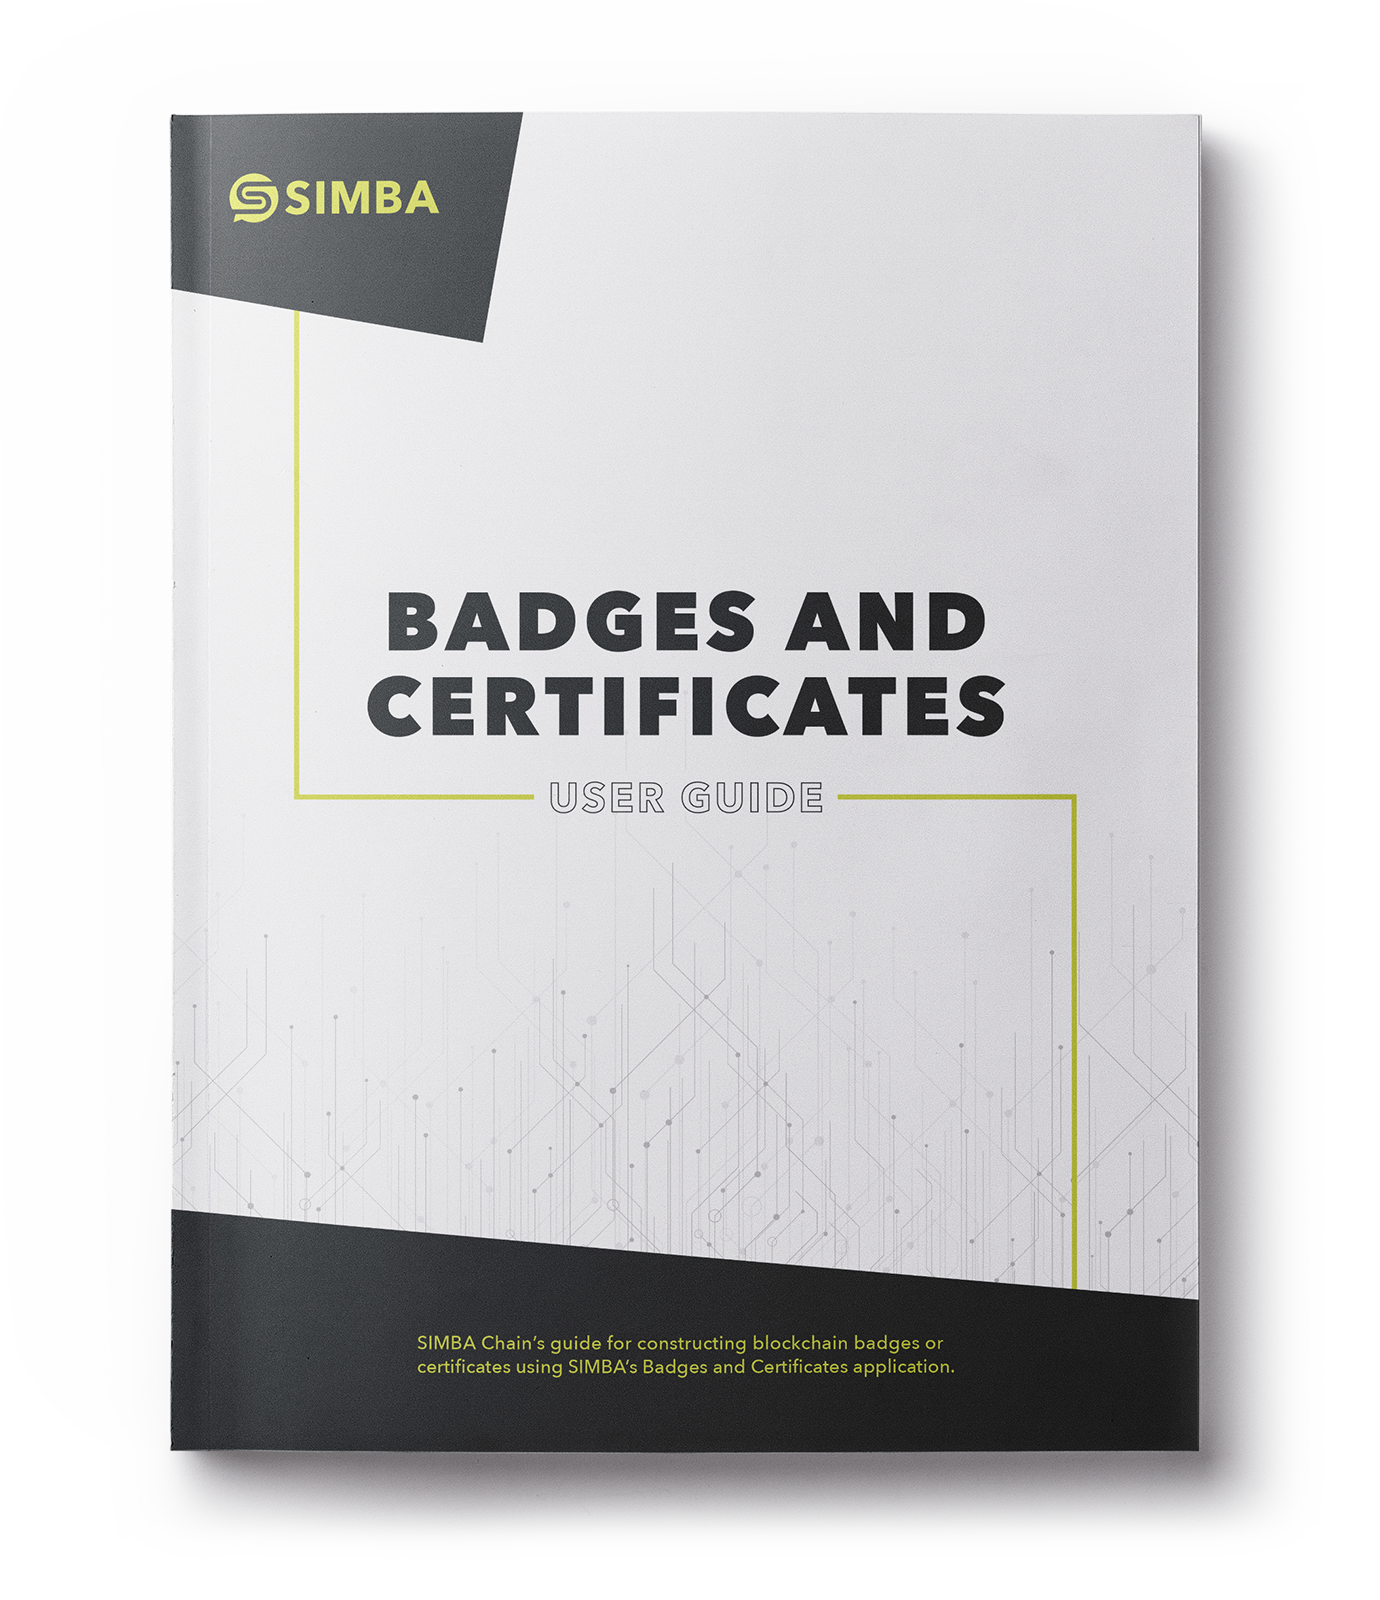 SIMBA Chain Badges and Certificates